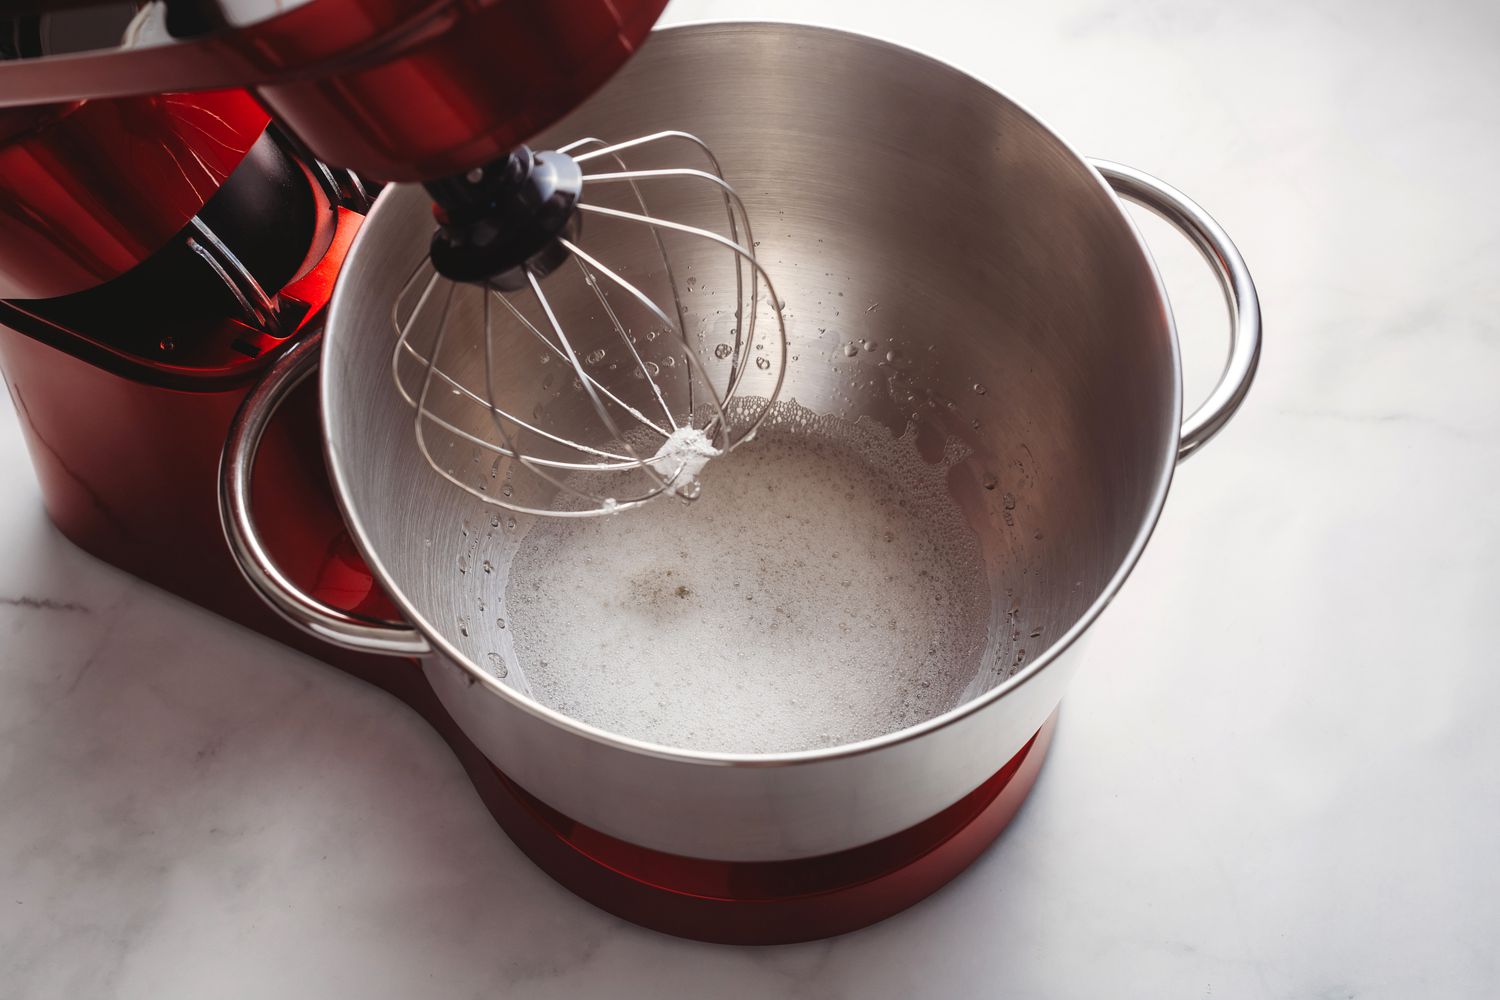 Egg whites in the bowl of the stand mixer with a whisk